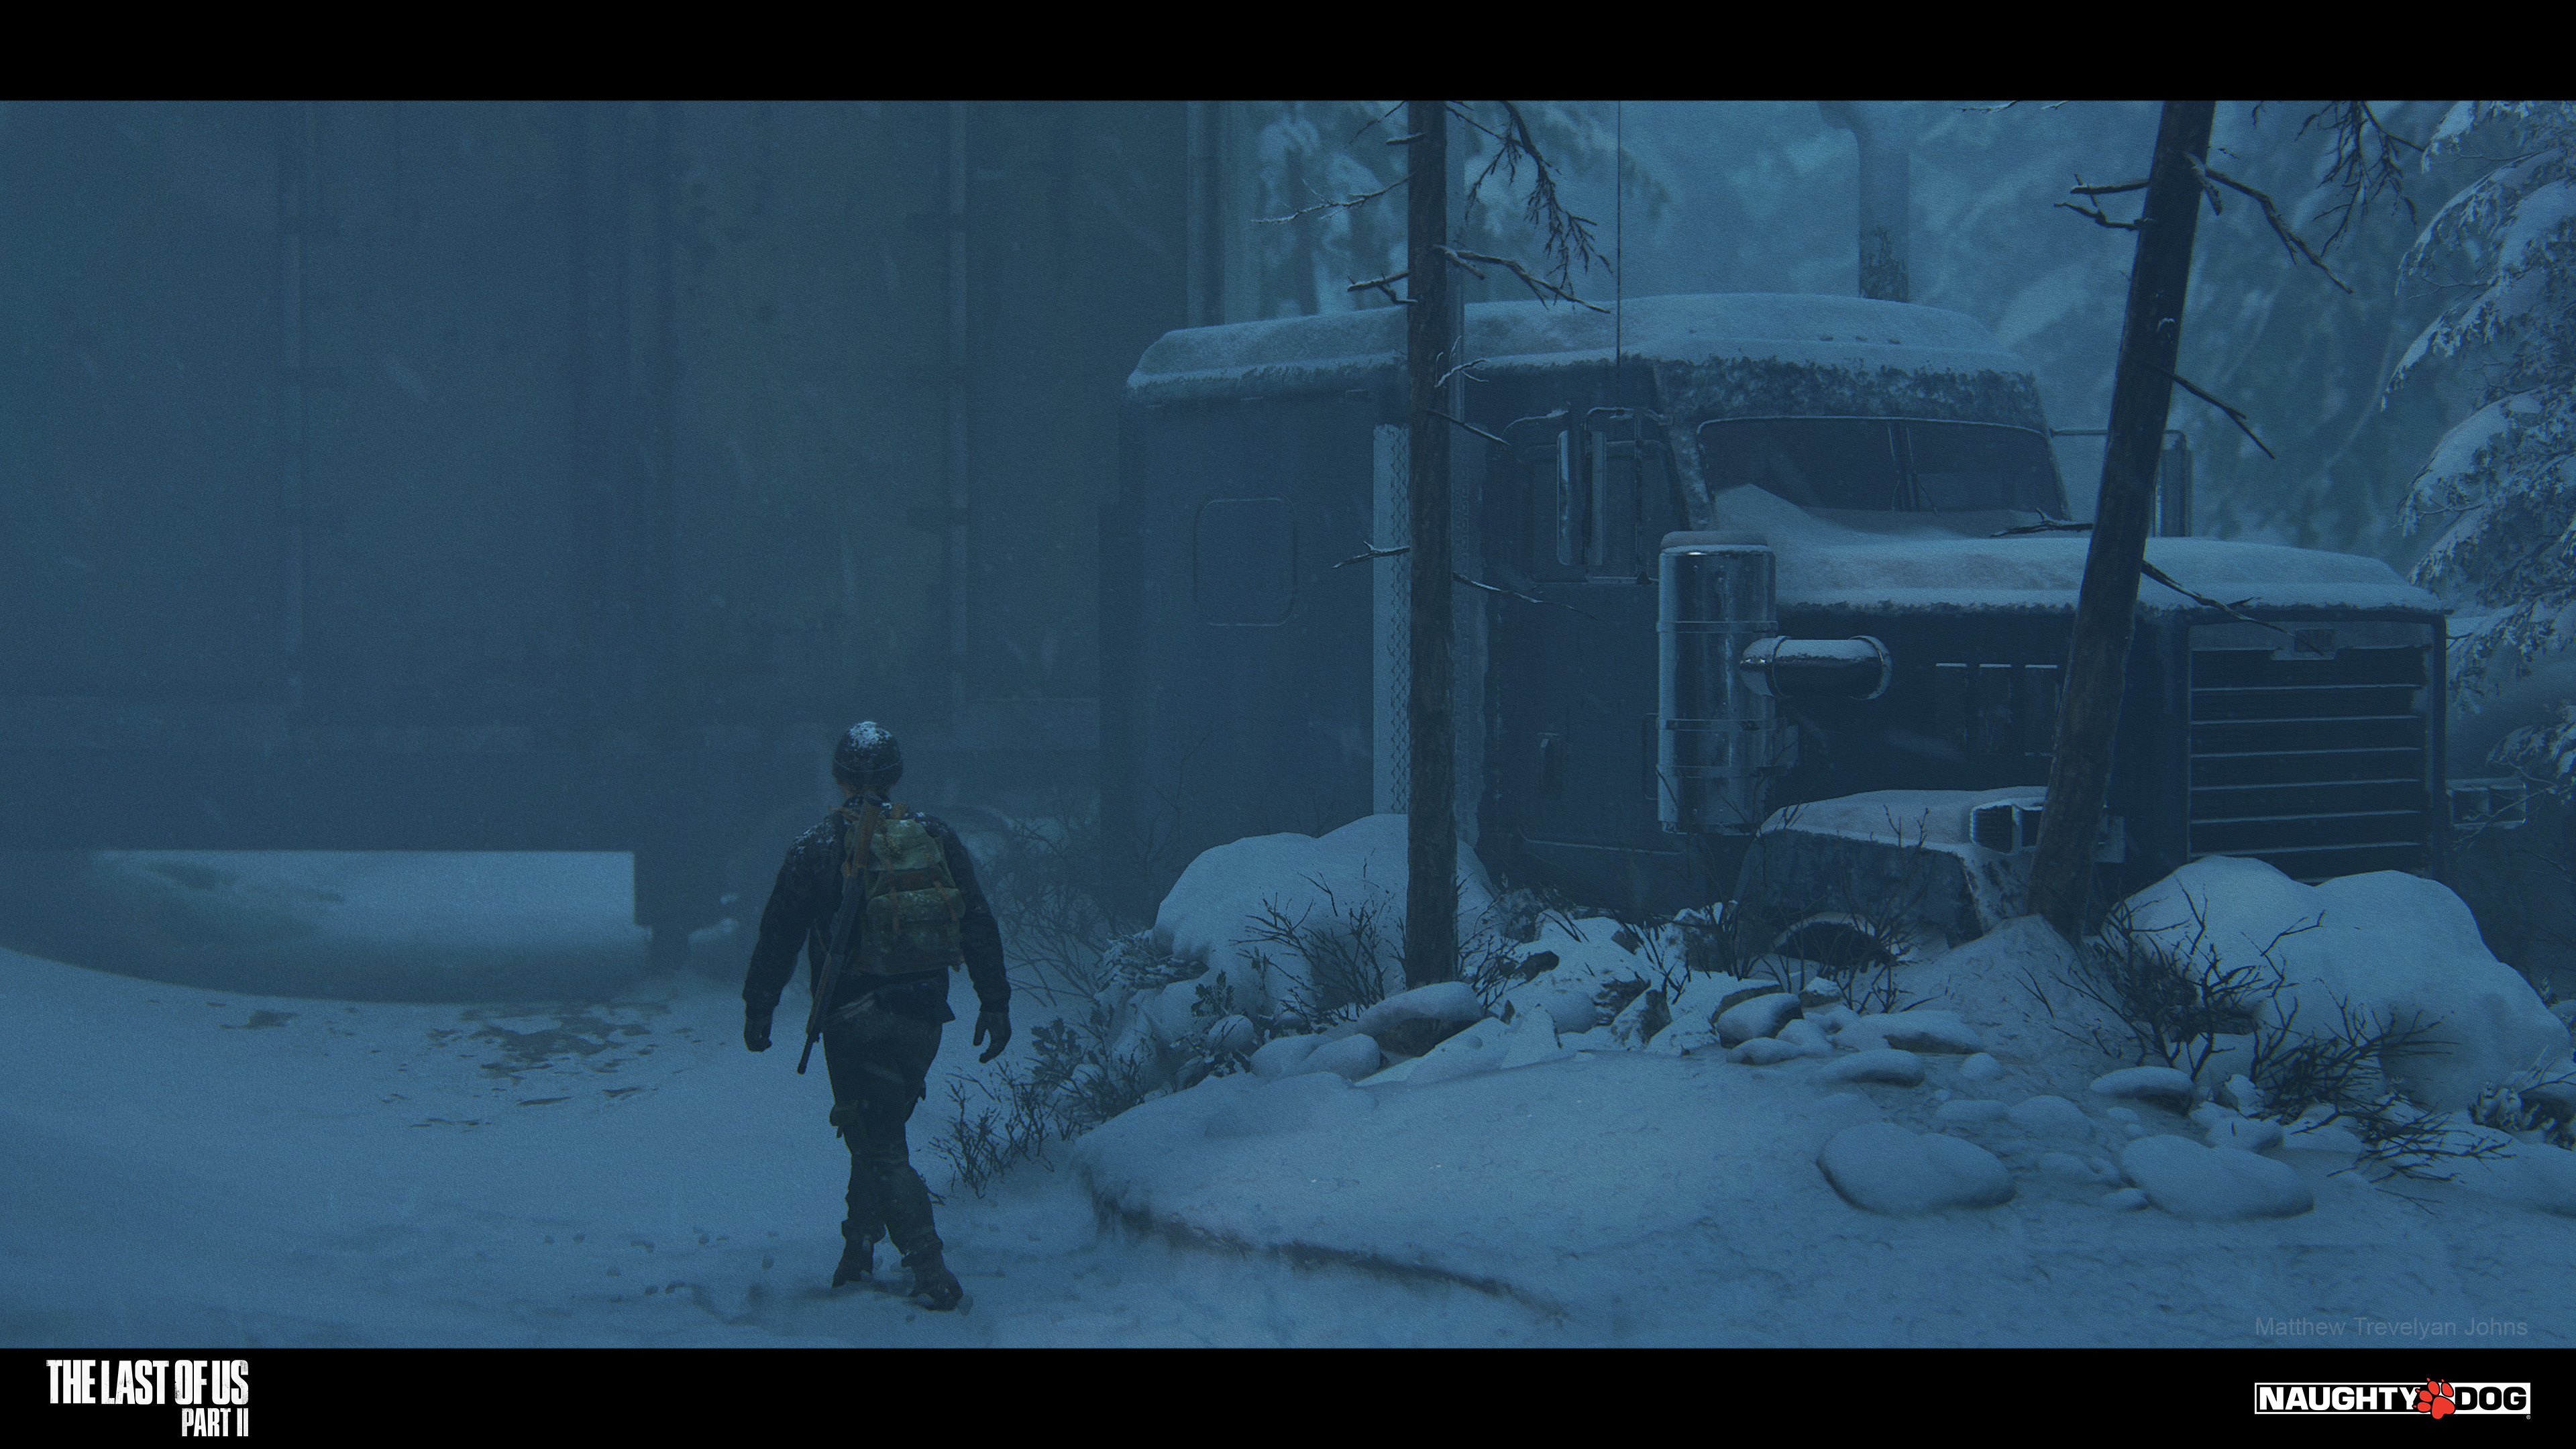 I loved this dark, foreboding area of the game, the environment artists did a great job placing the vehicles and building the snow drifts up and around them. Environment artists were Julian Elwood and Jeremy Huxley plus others in supporting roles